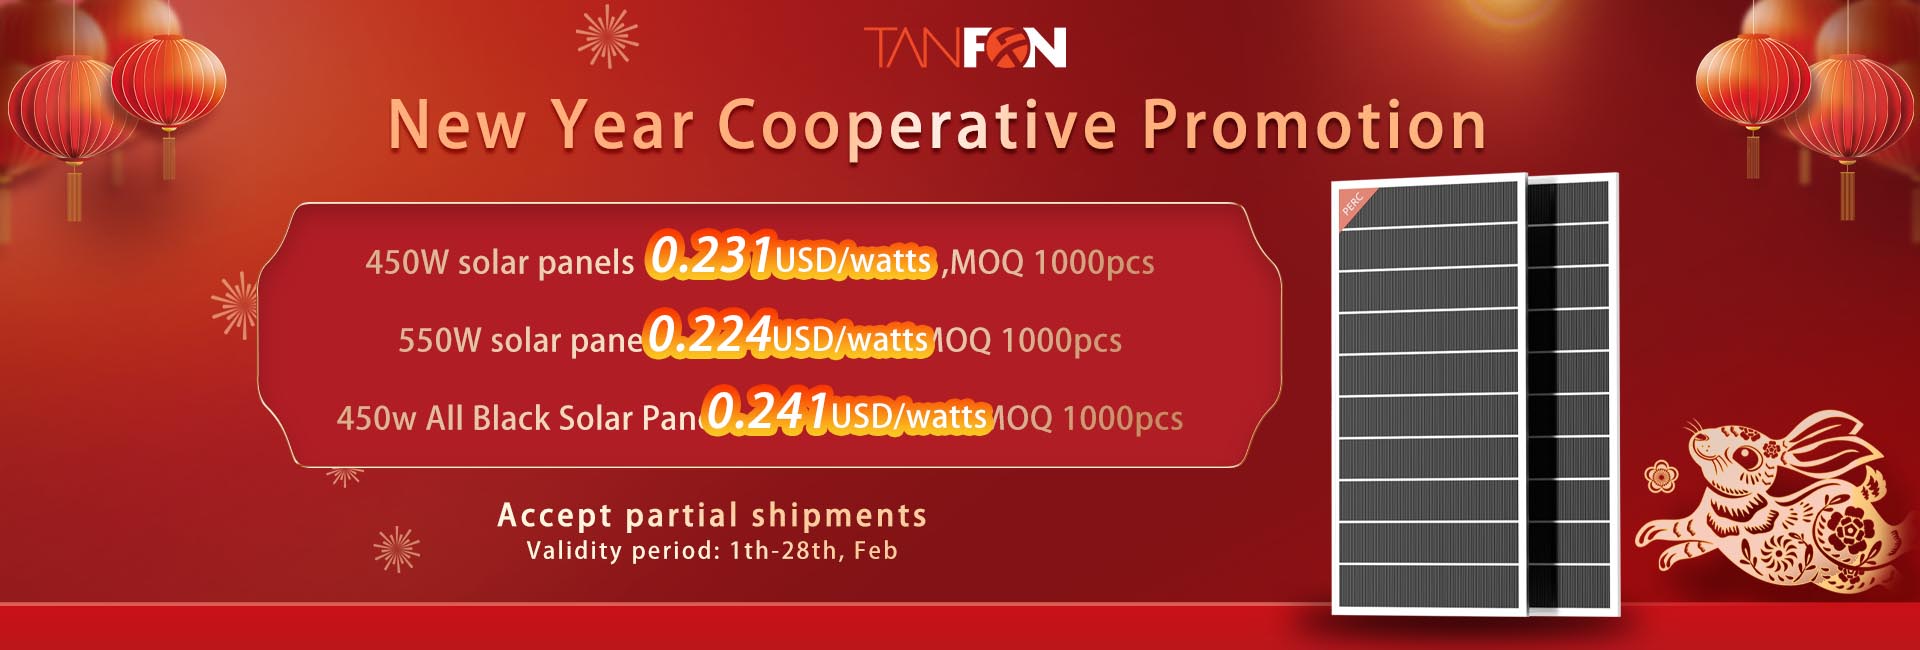 New Year Cooperative Promotion